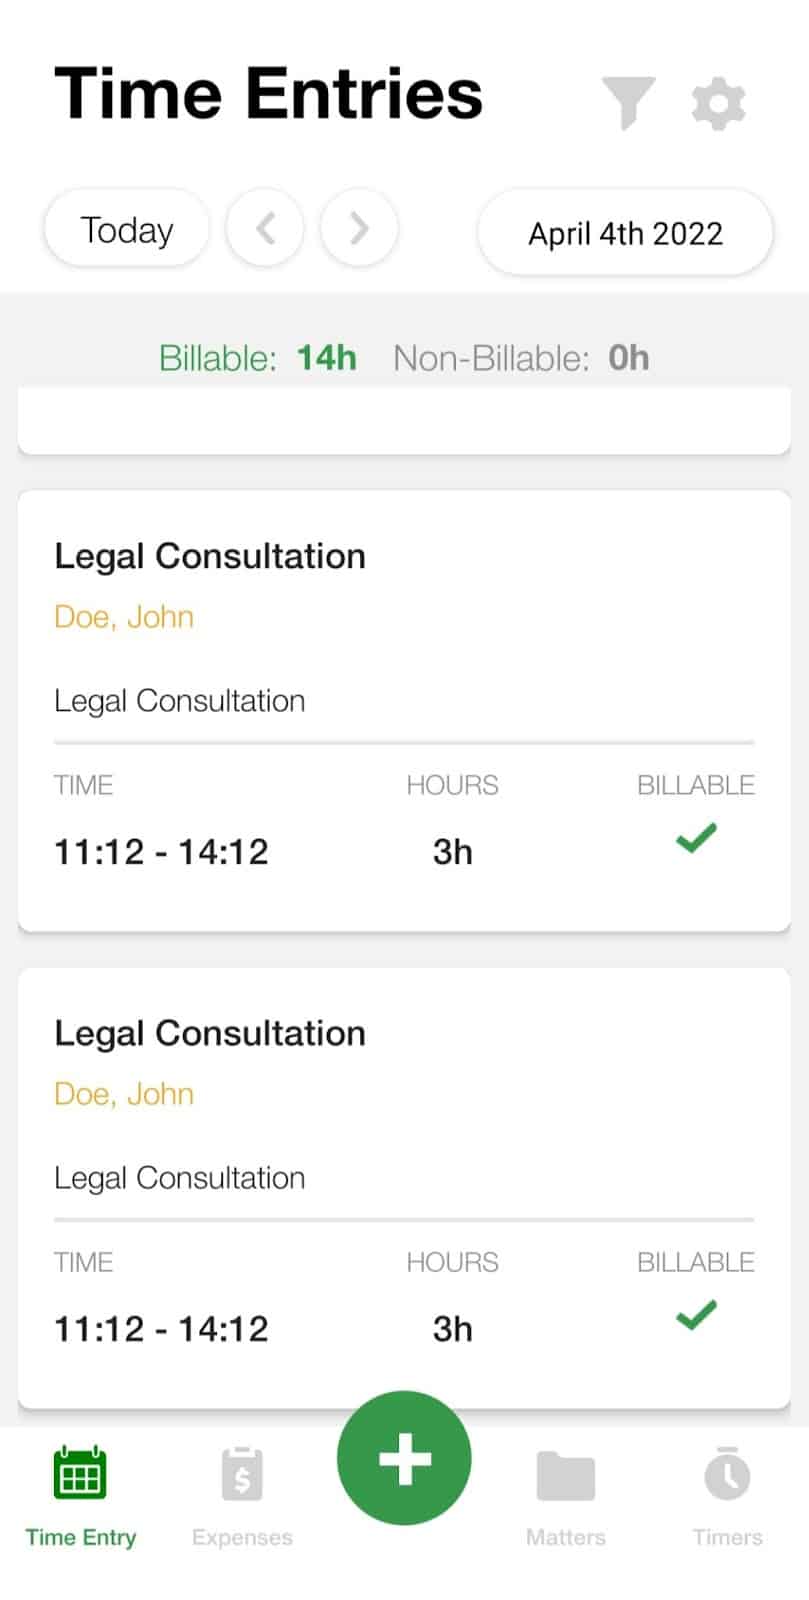 Sample image of LeanLaw’s mobile dashboard.